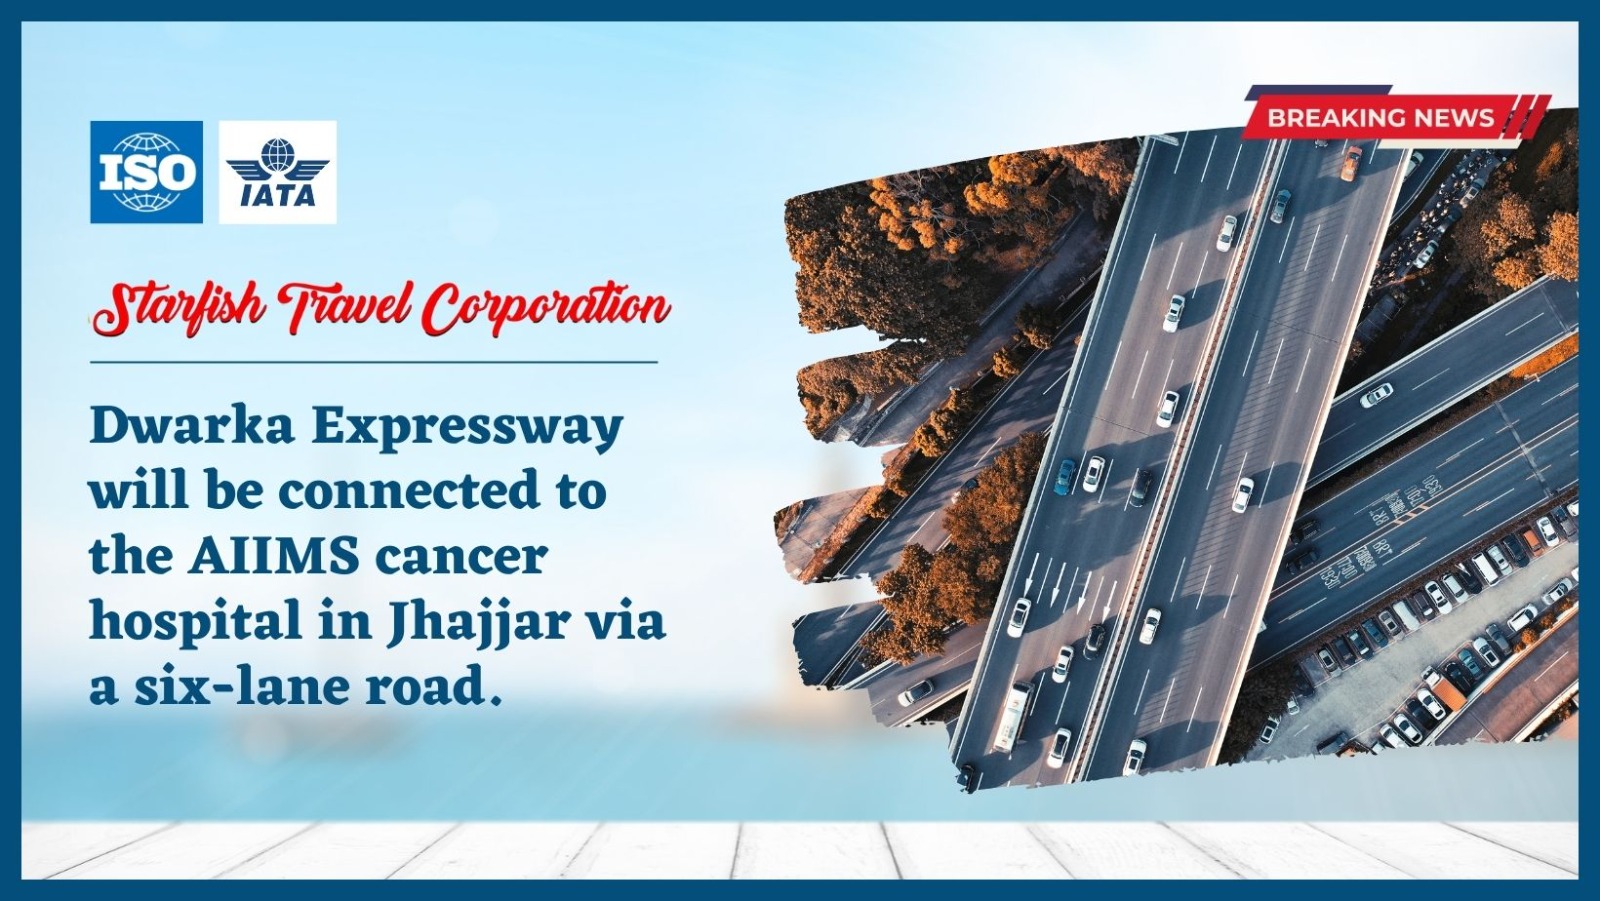 Dwarka Expressway will be connected to the AIIMS cancer hospital in Jhajjar via a six-lane road.